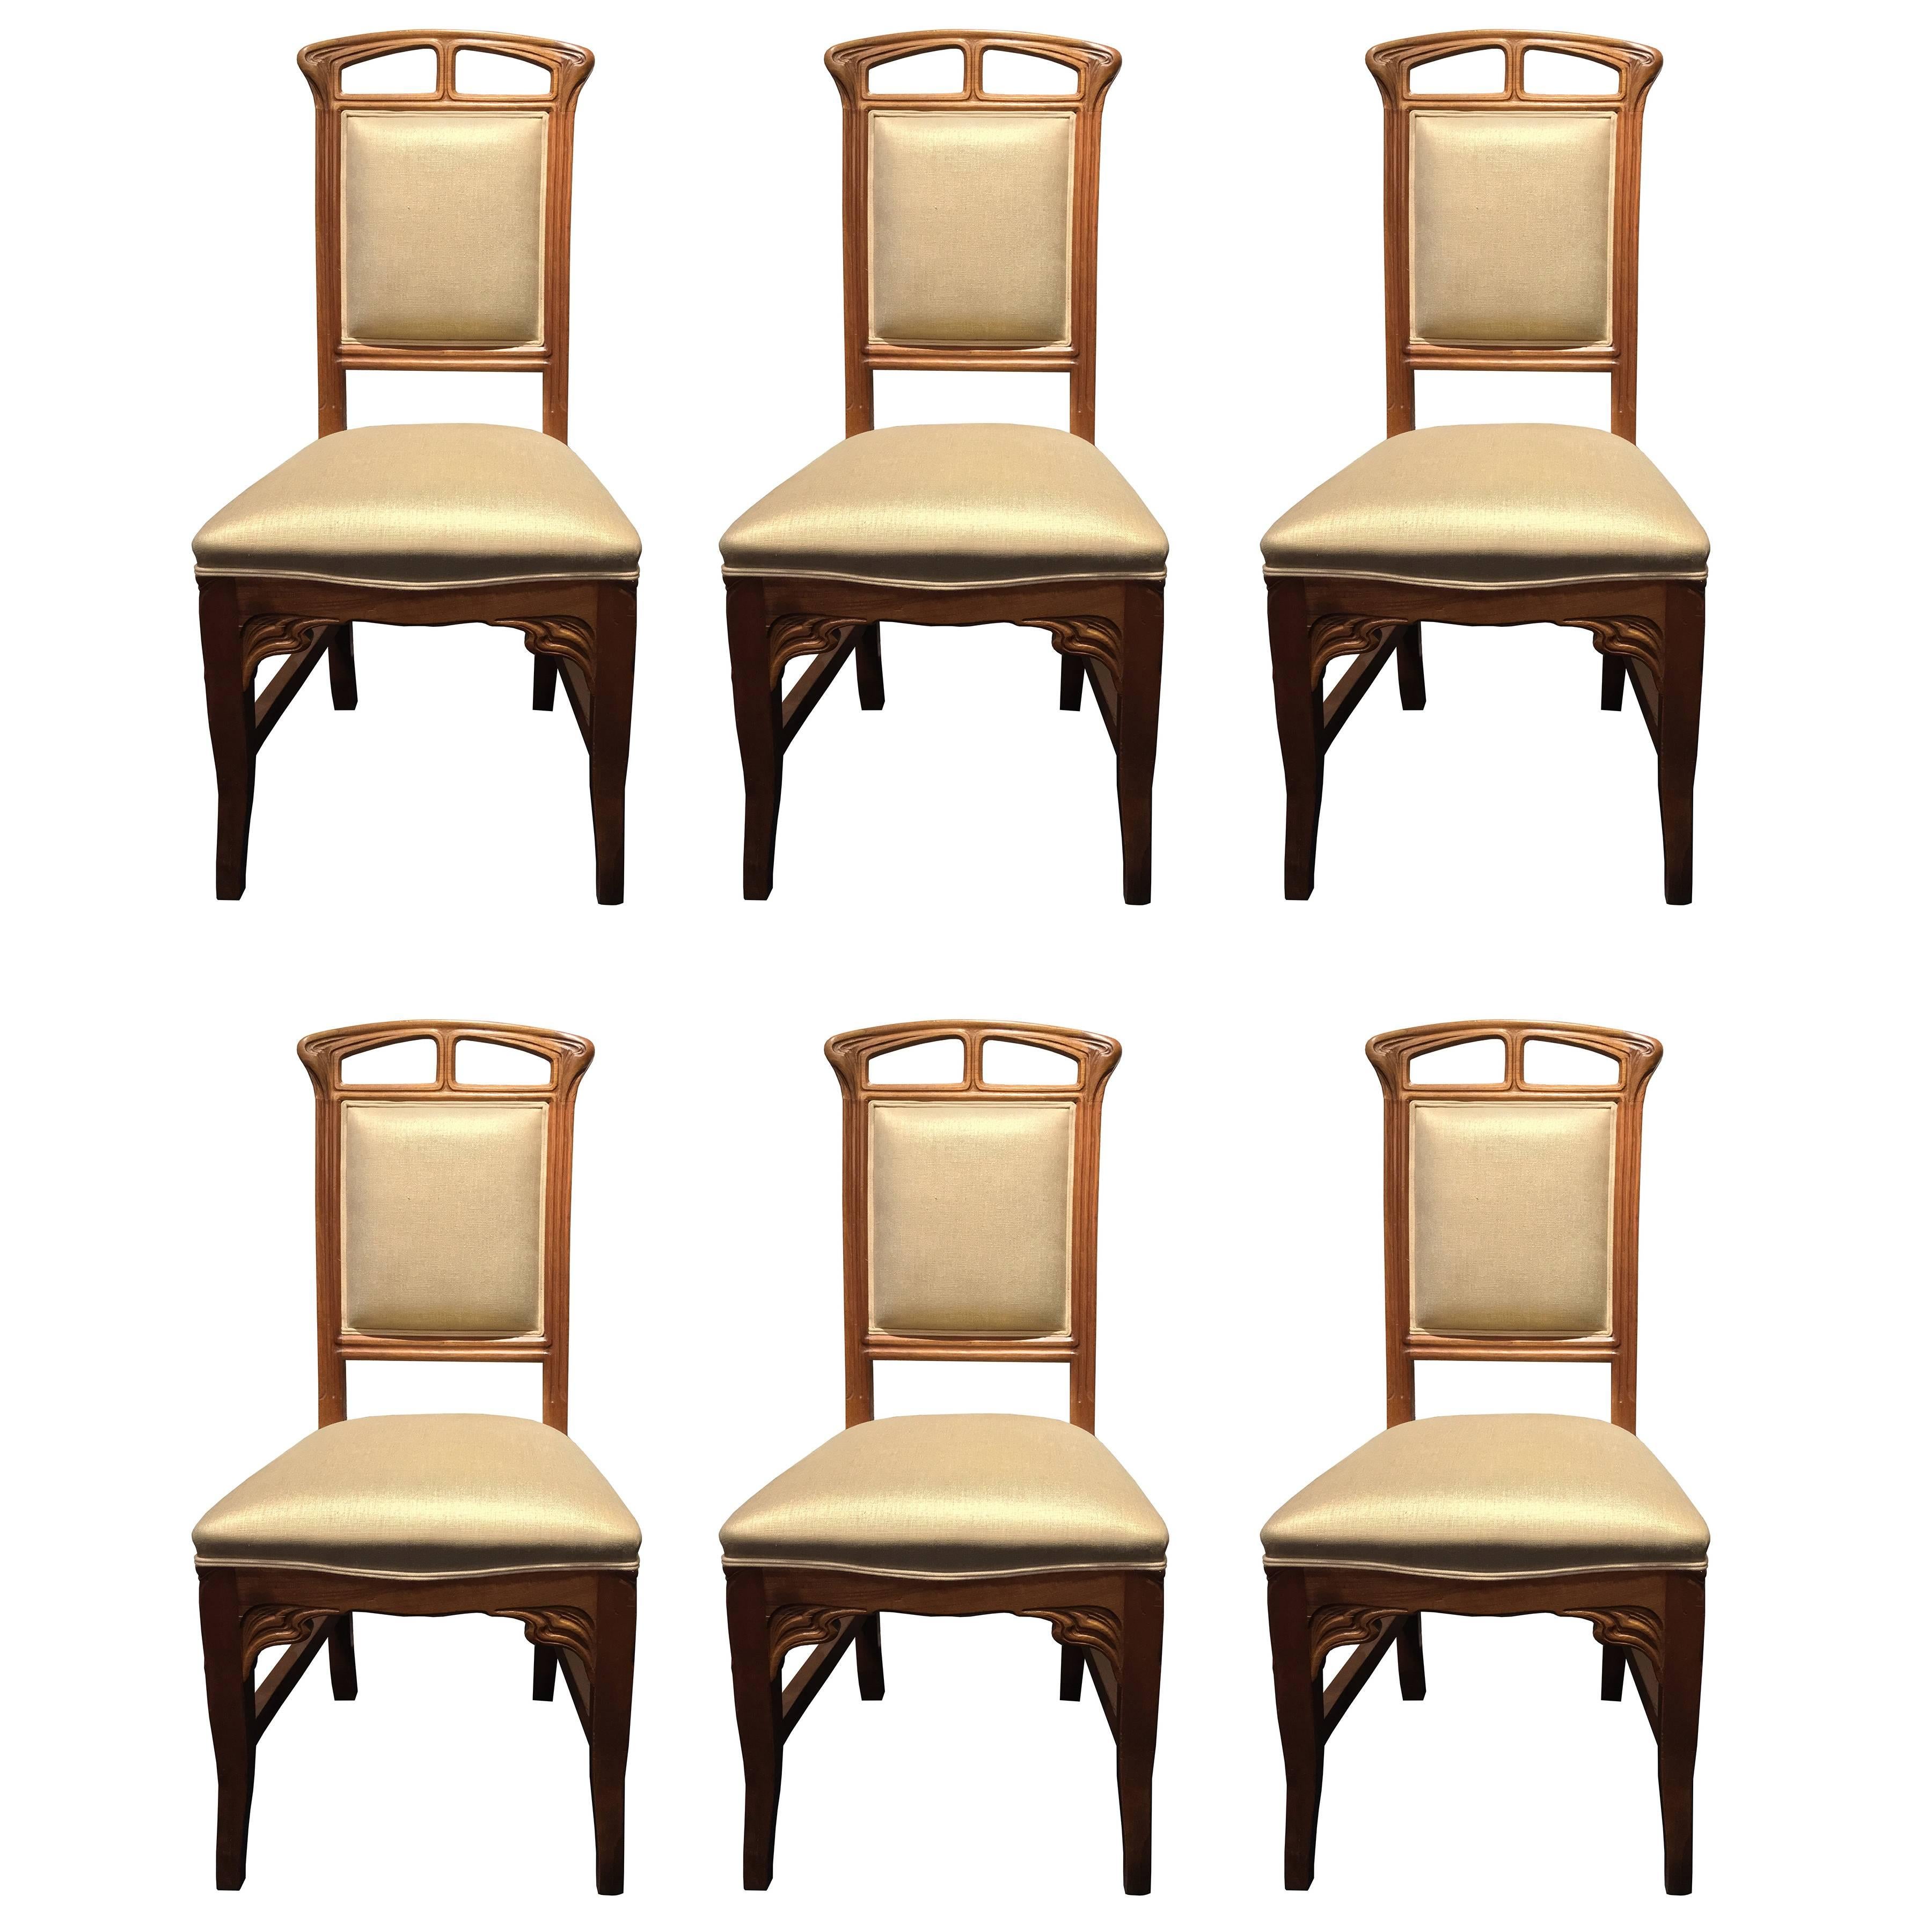 Set of Six Liberty Art Nouveau Wood Chairs Mobilificio Sello Udine Italy For Sale